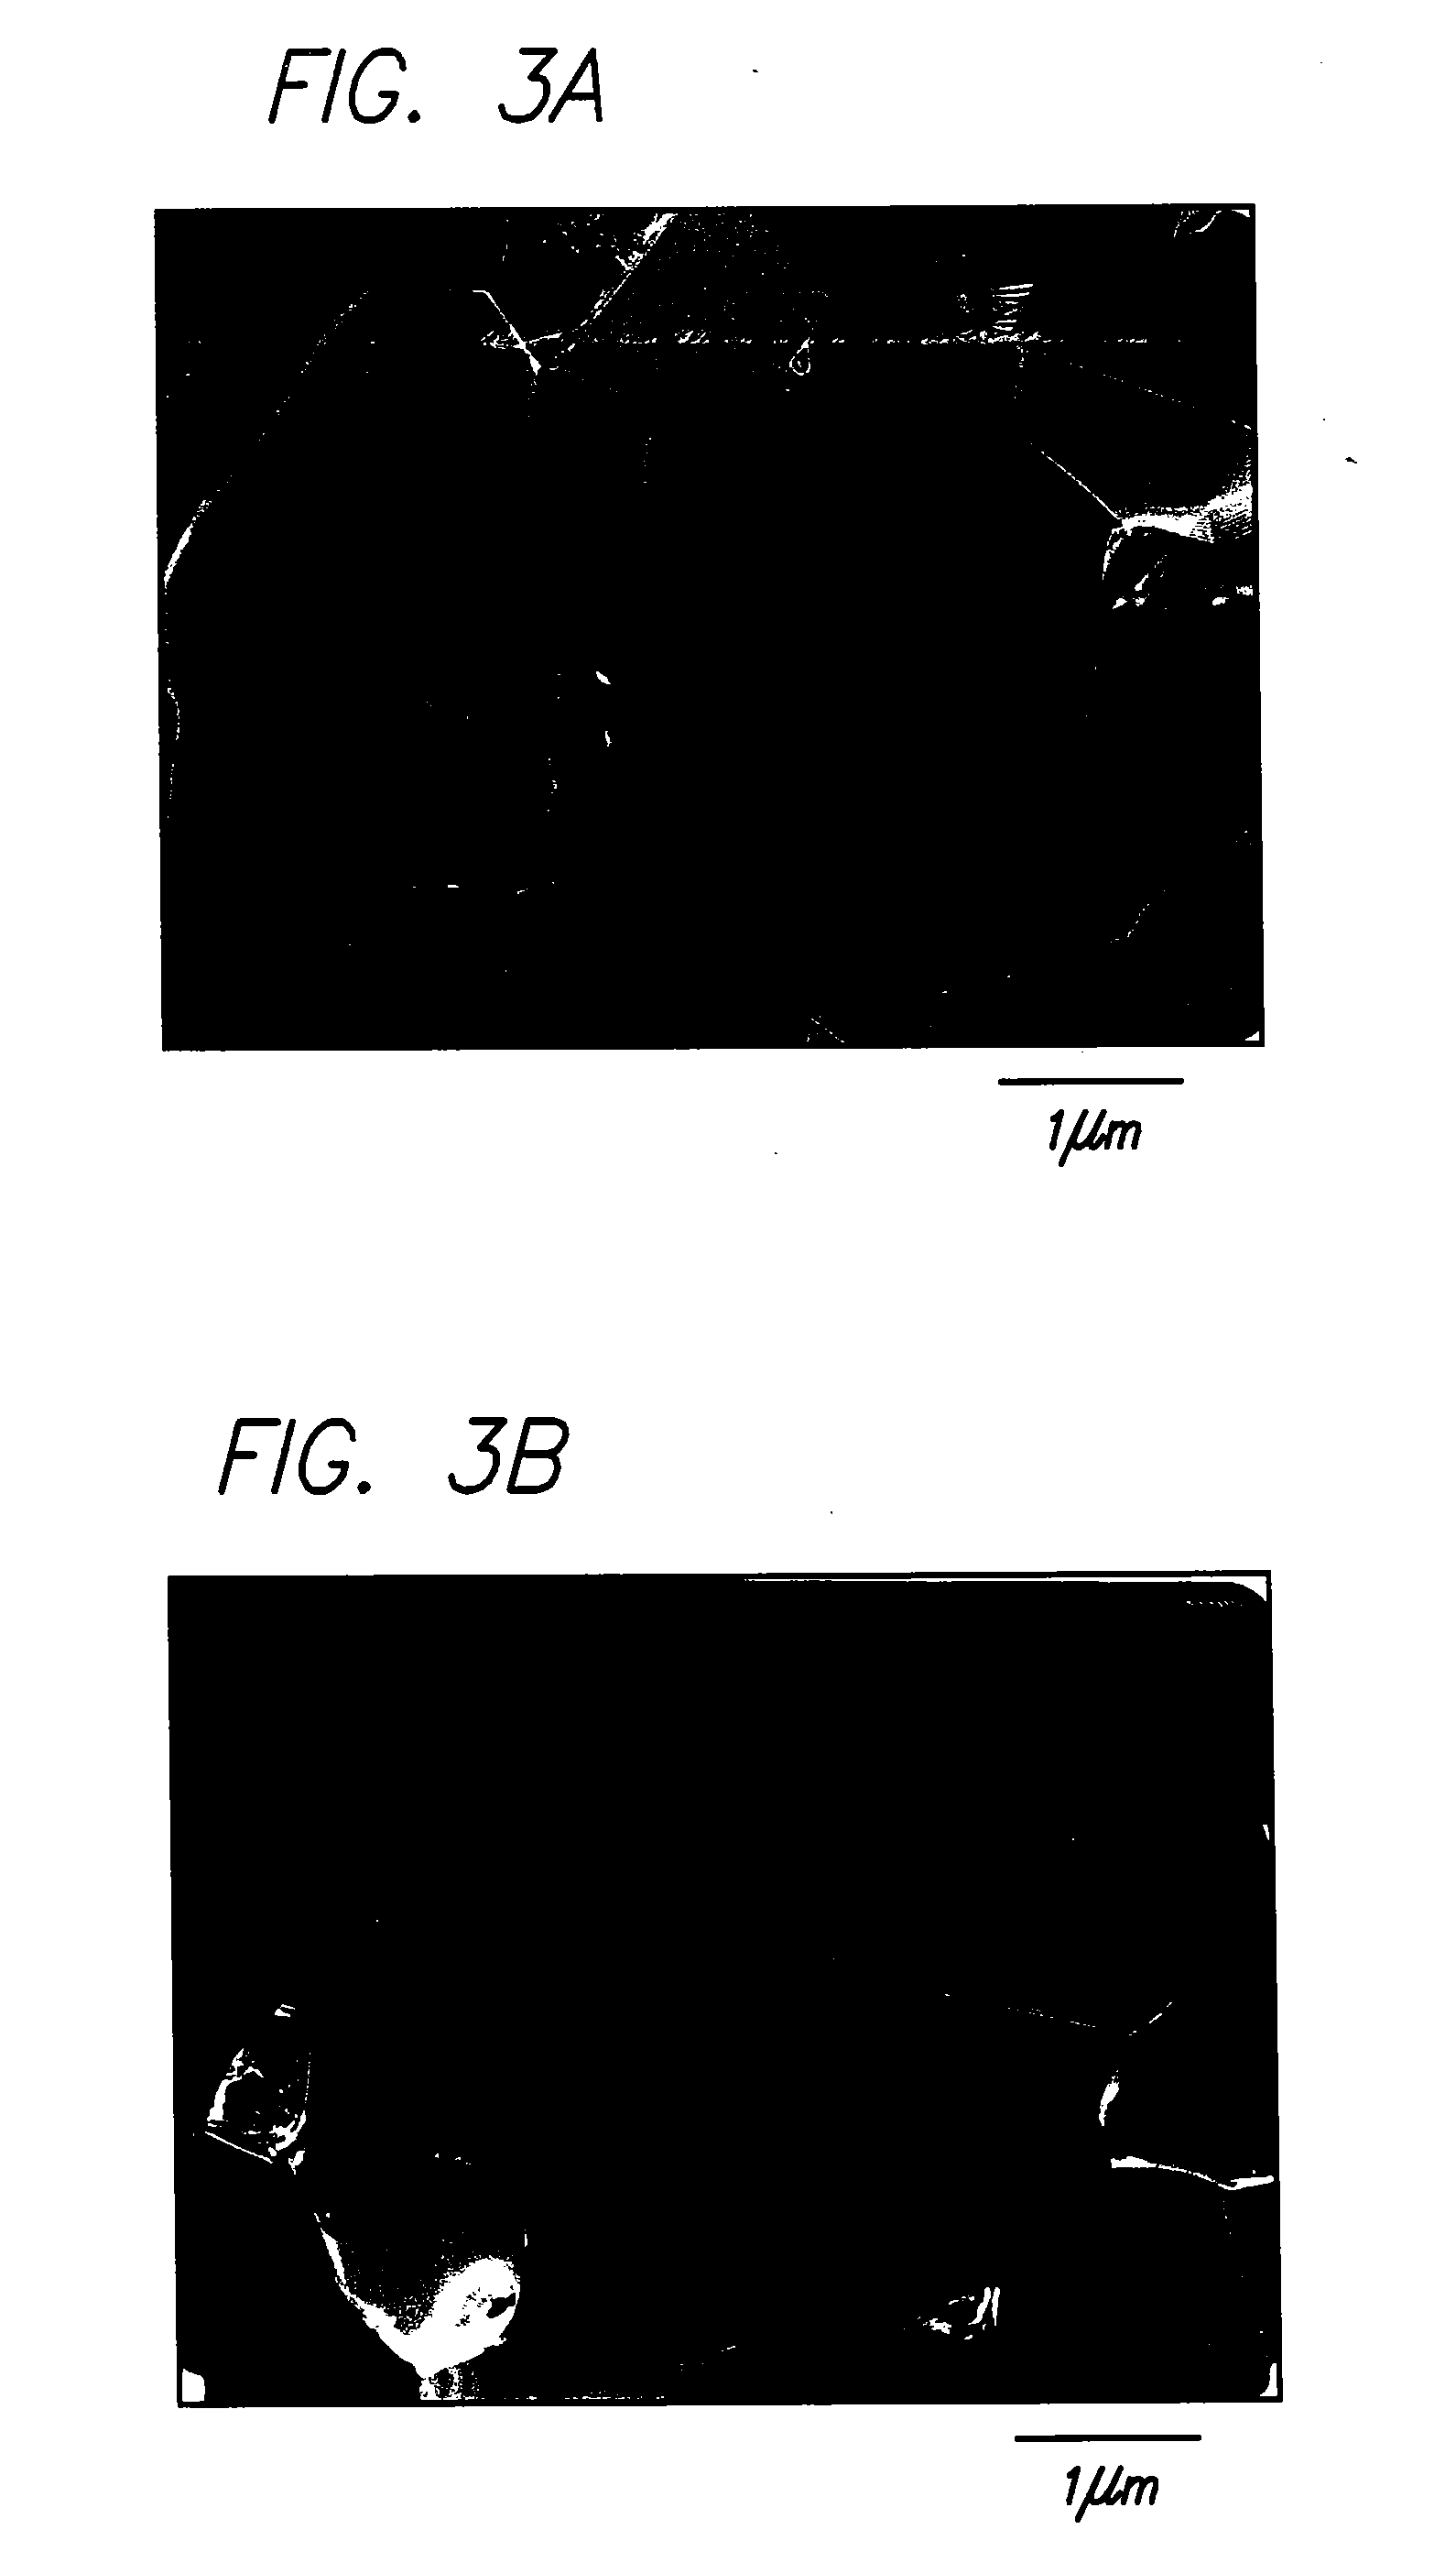 Manufacture of fine-grained material for use in medical devices